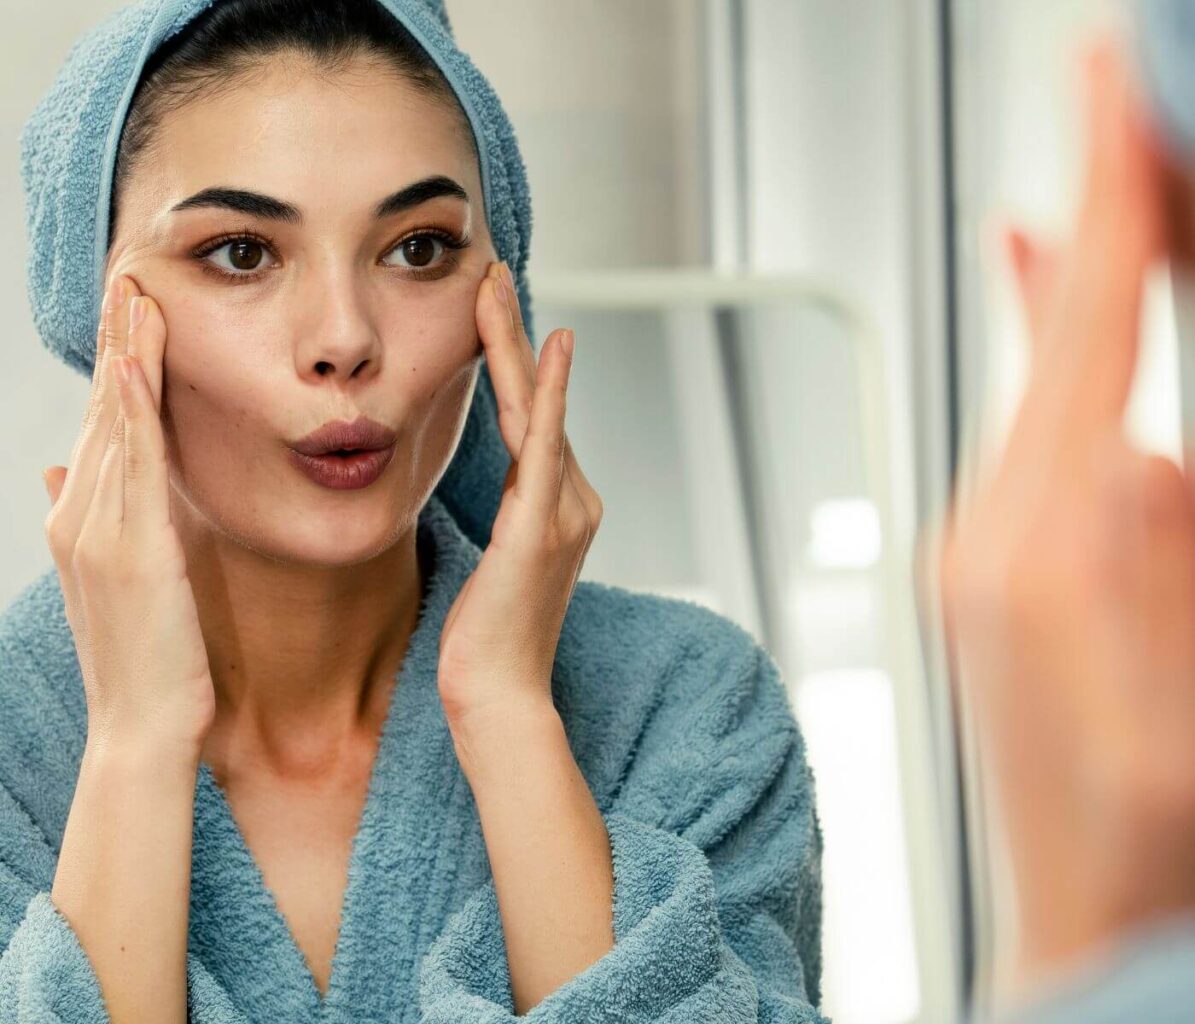 Face Yoga For Women - Woman's Reflection in Bathroom Mirror Practicing Face Yoga Routine 